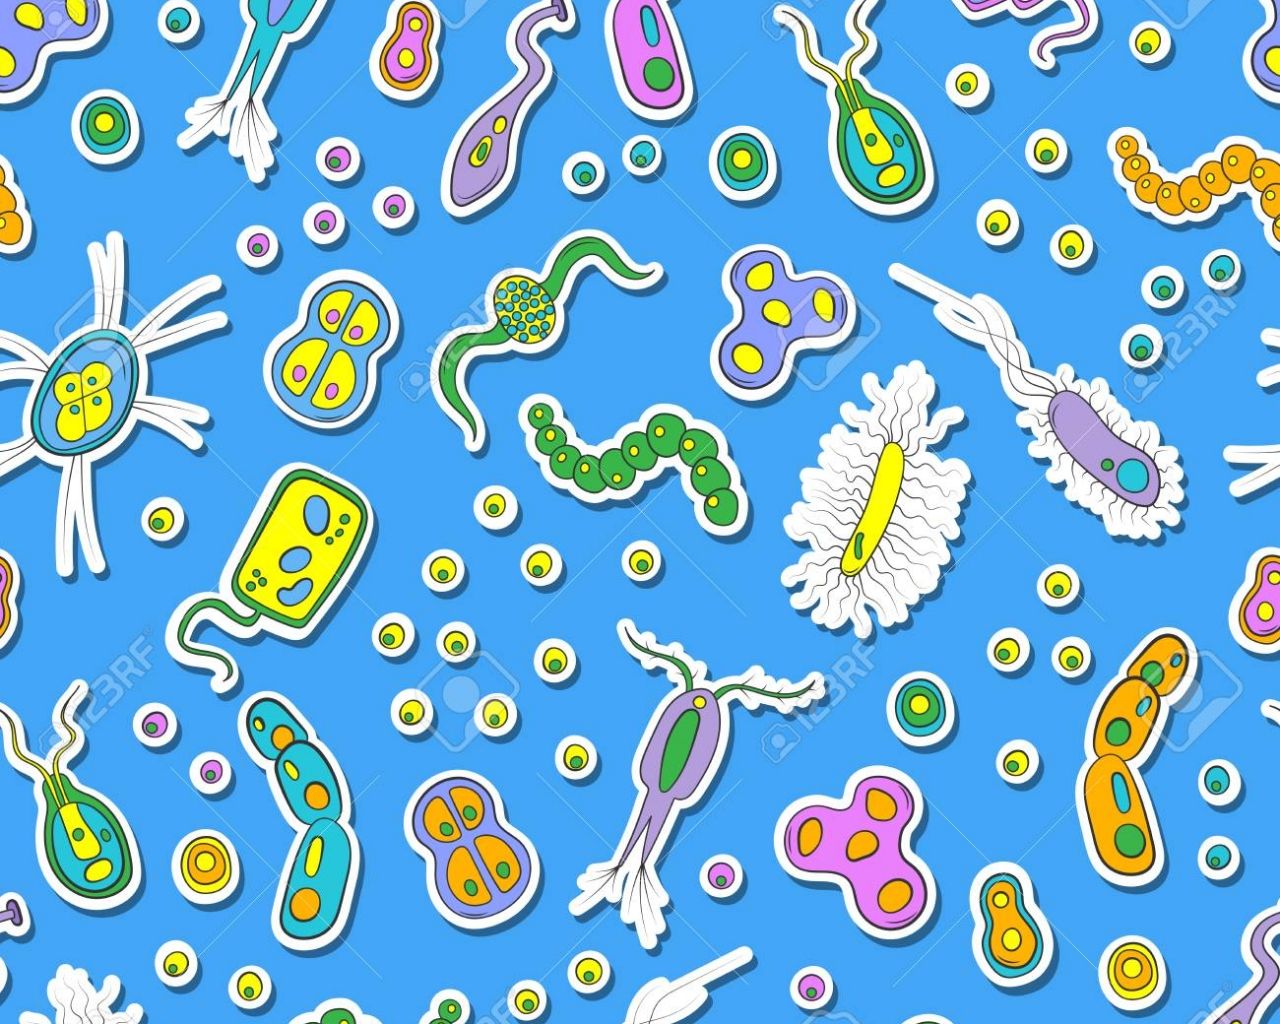 Free download Seamless Pattern With Image Of Bacteria Germs